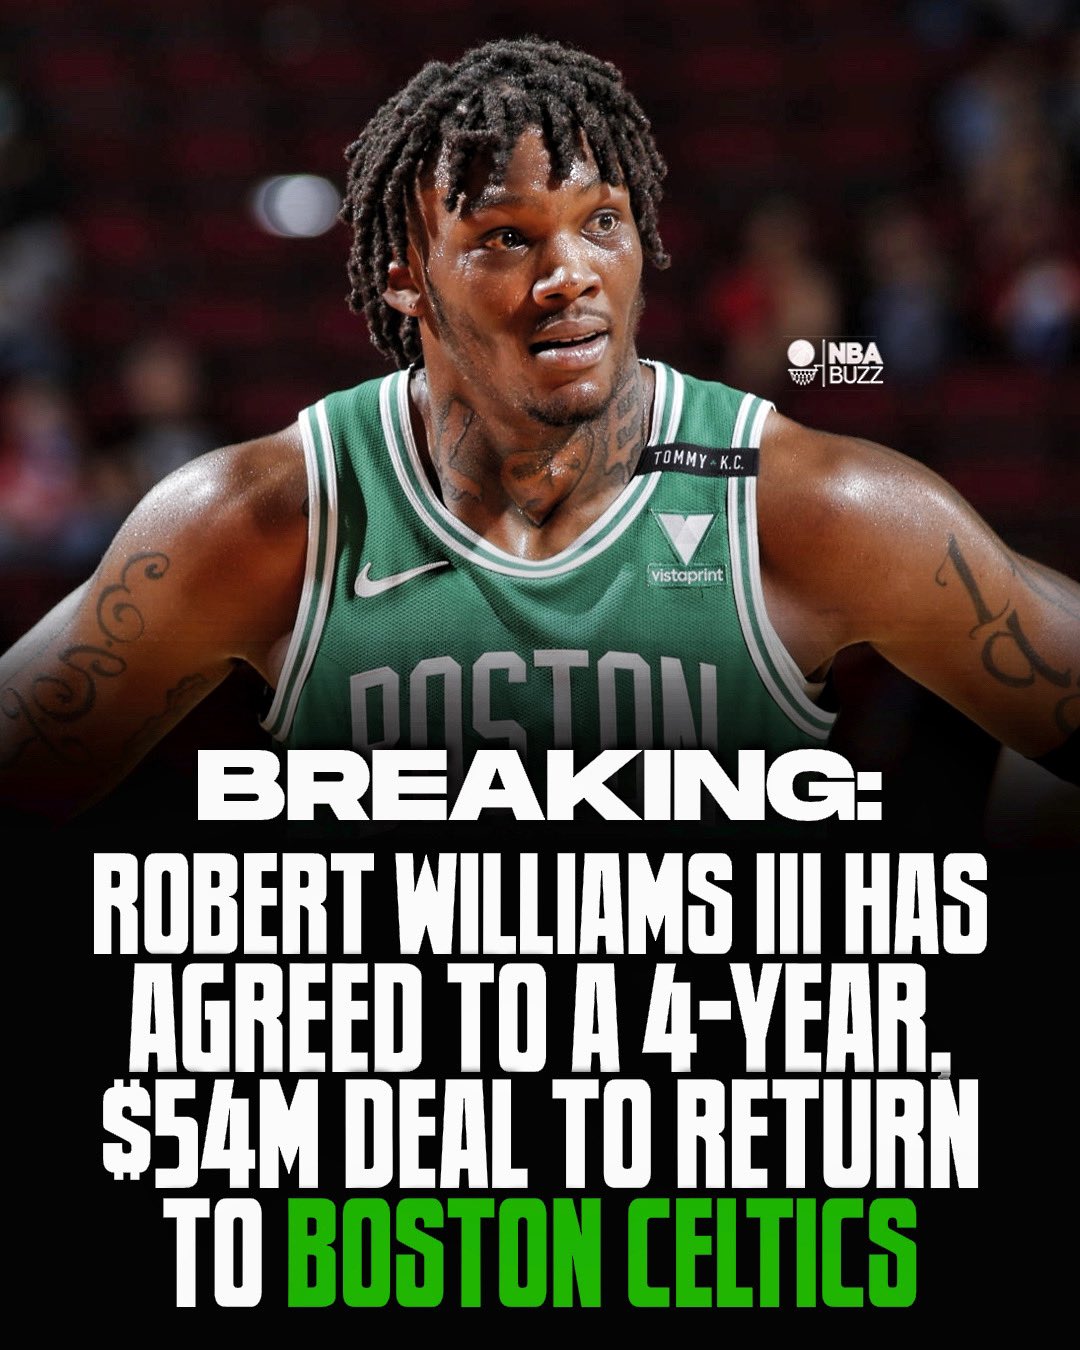 NBA Buzz on X: BREAKING: 'TIME LORD' GETS PAID! Robert Williams III signed  a 4-year, $54M deal to remain with the Boston Celtics! Williams per 36 MIN  in 2020-21: 15.2 PPG, 13.1